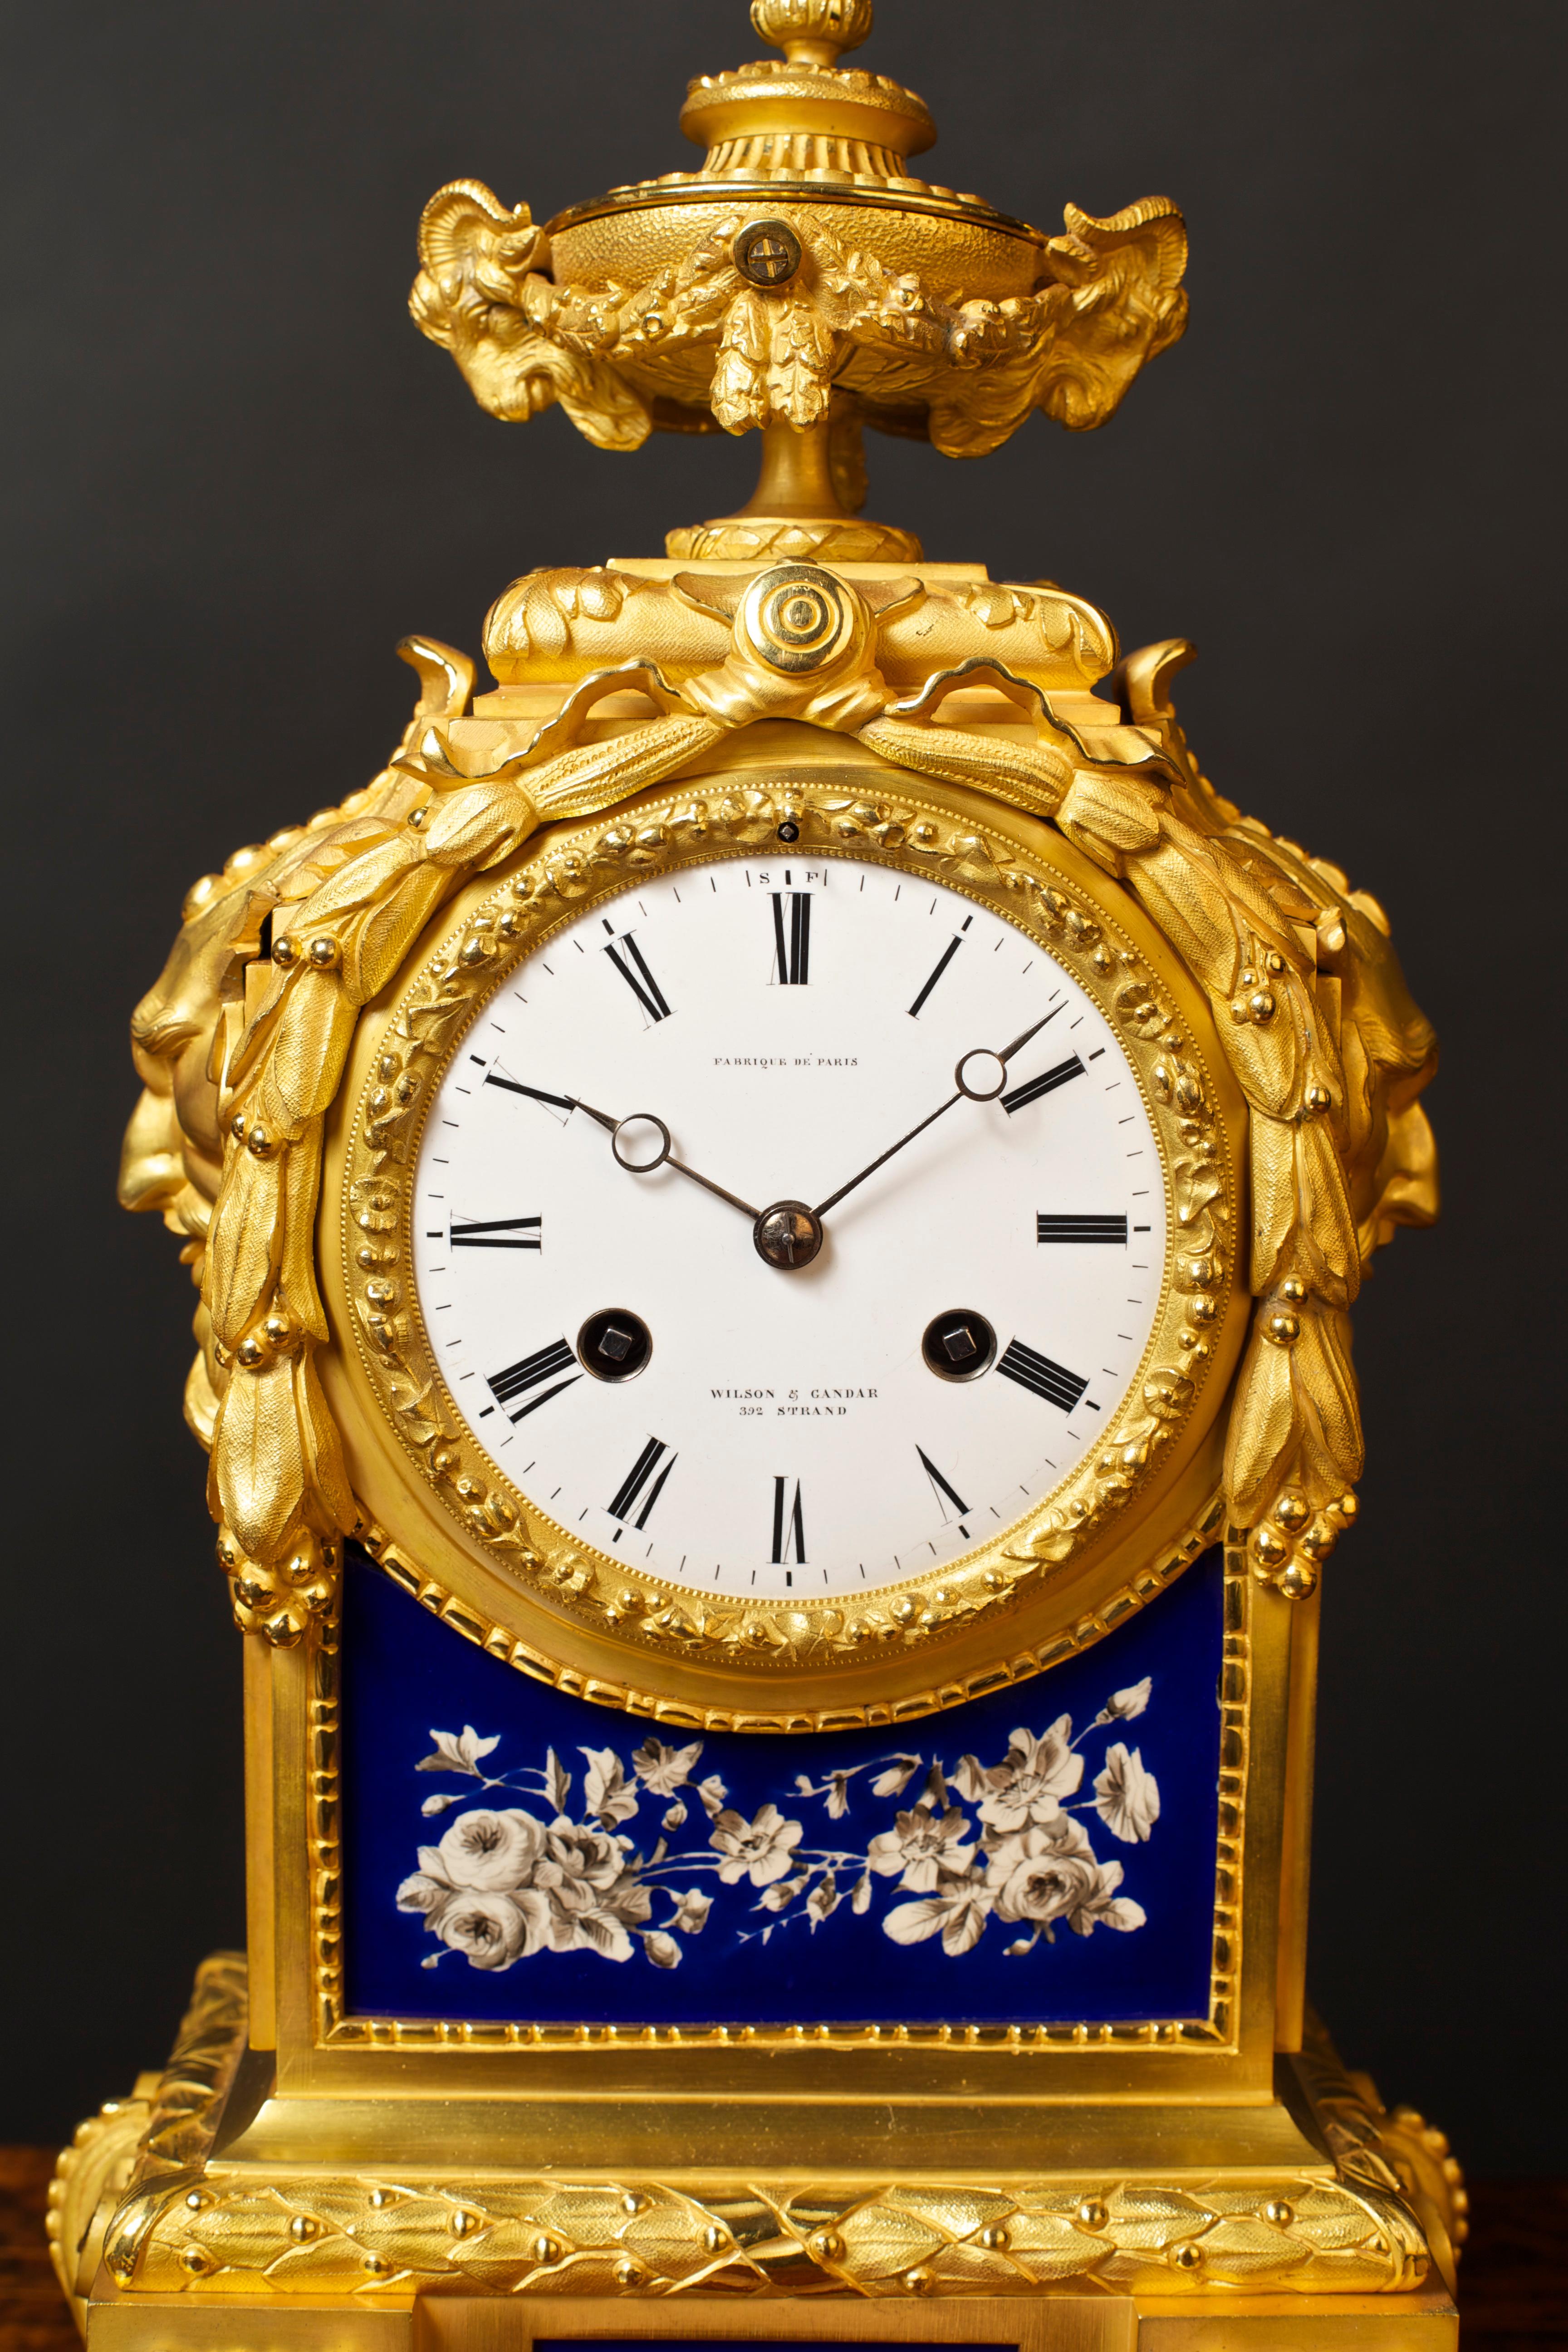 French gilded ormolu mantel clock with blue hand painted floral porcelain panels (the panels all separately signed ‘Creilliet Montereai, Medaillon D’or, L.M. Cie 1834-38). Beautifully decorated case with applied ormolu mounts, floral swags to each